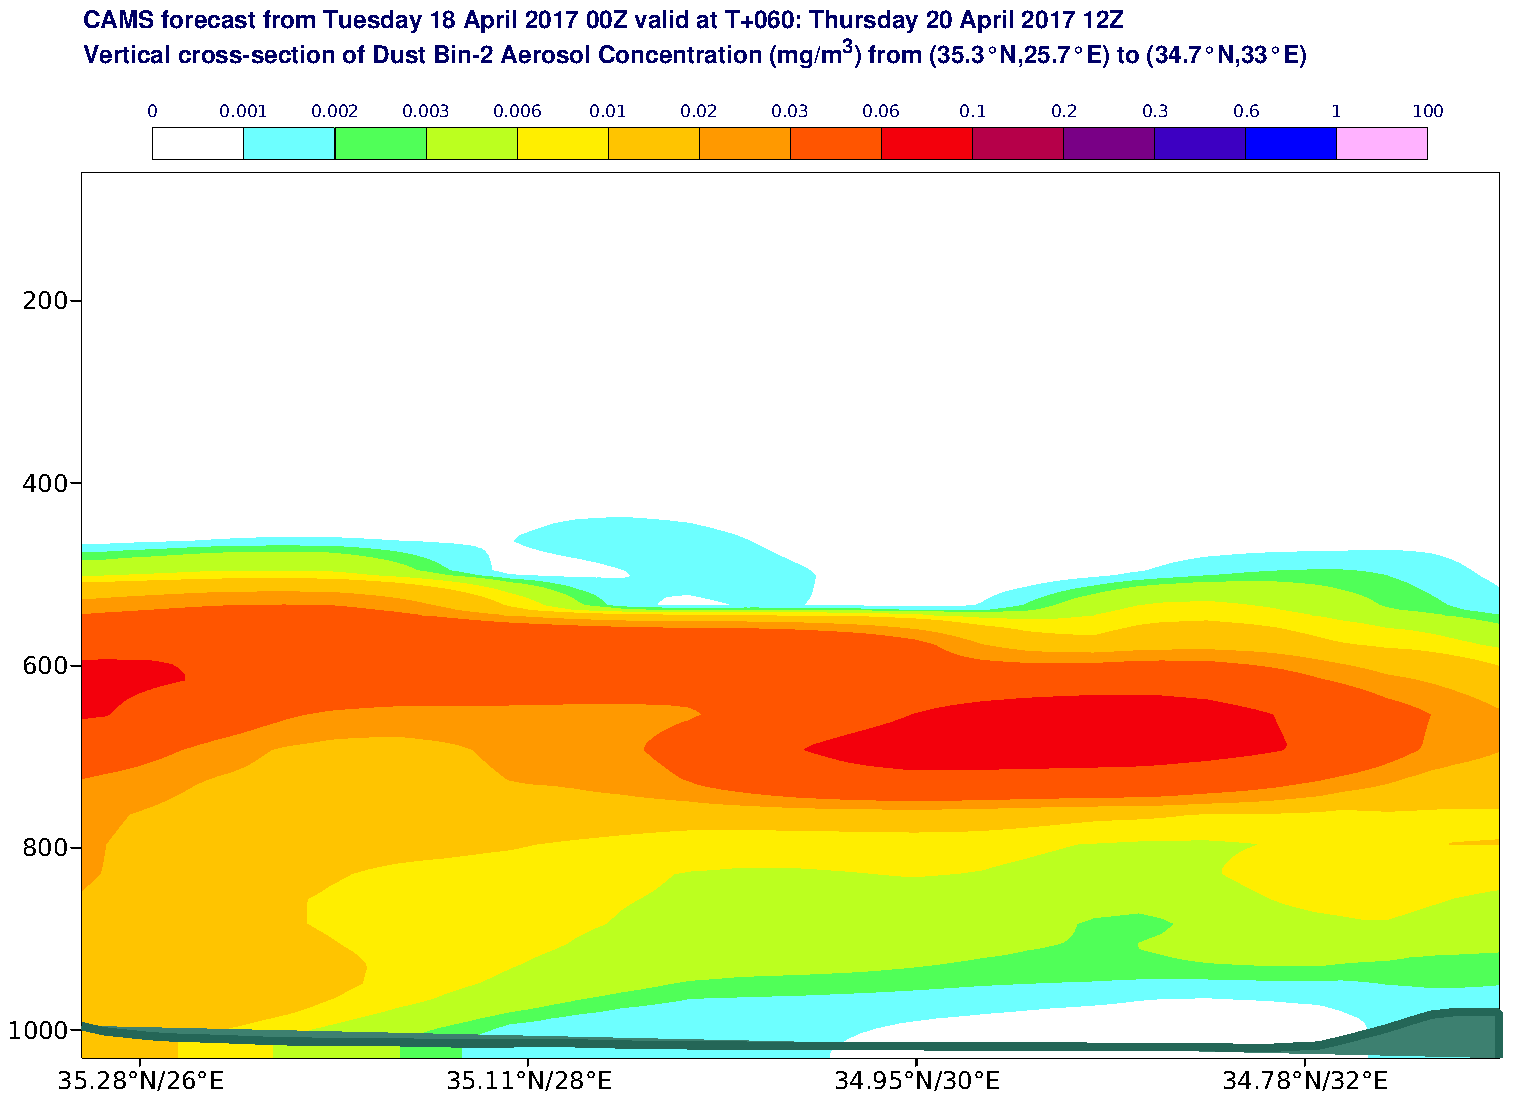 Vertical cross-section of Dust Bin-2 Aerosol Concentration (mg/m3) valid at T60 - 2017-04-20 12:00